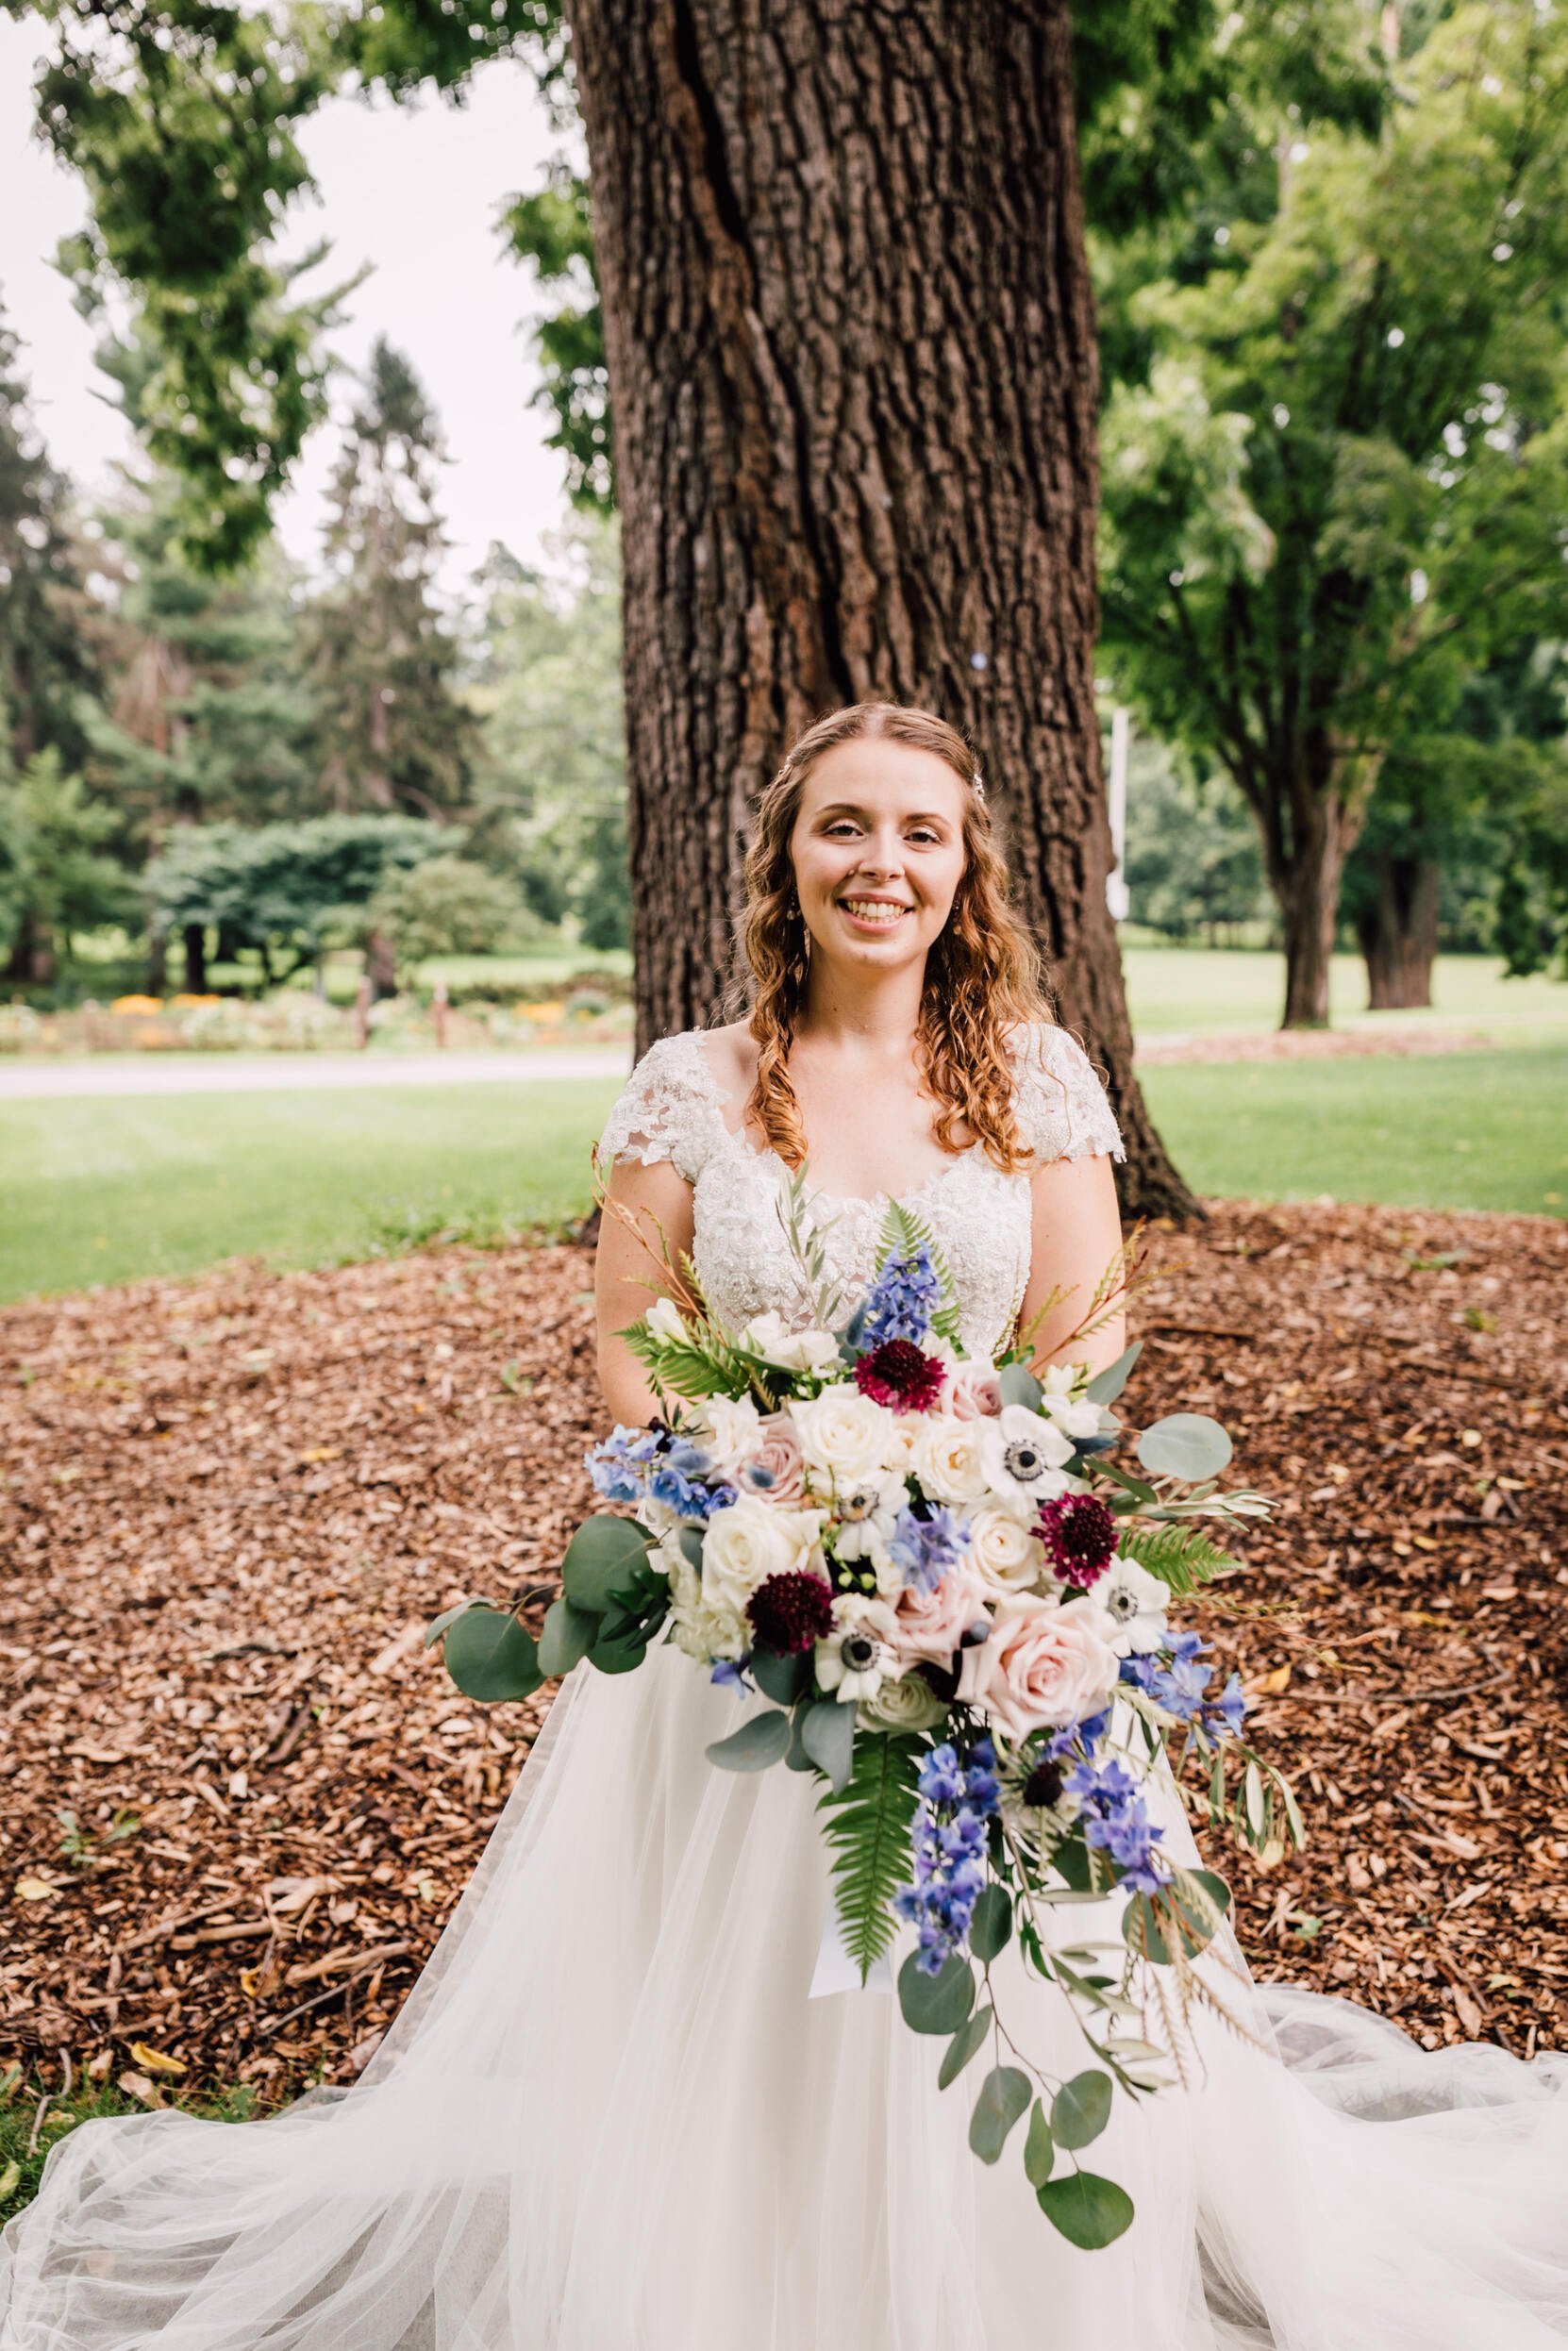  Bride stands smiling with her bouquet during garden wedding photography 